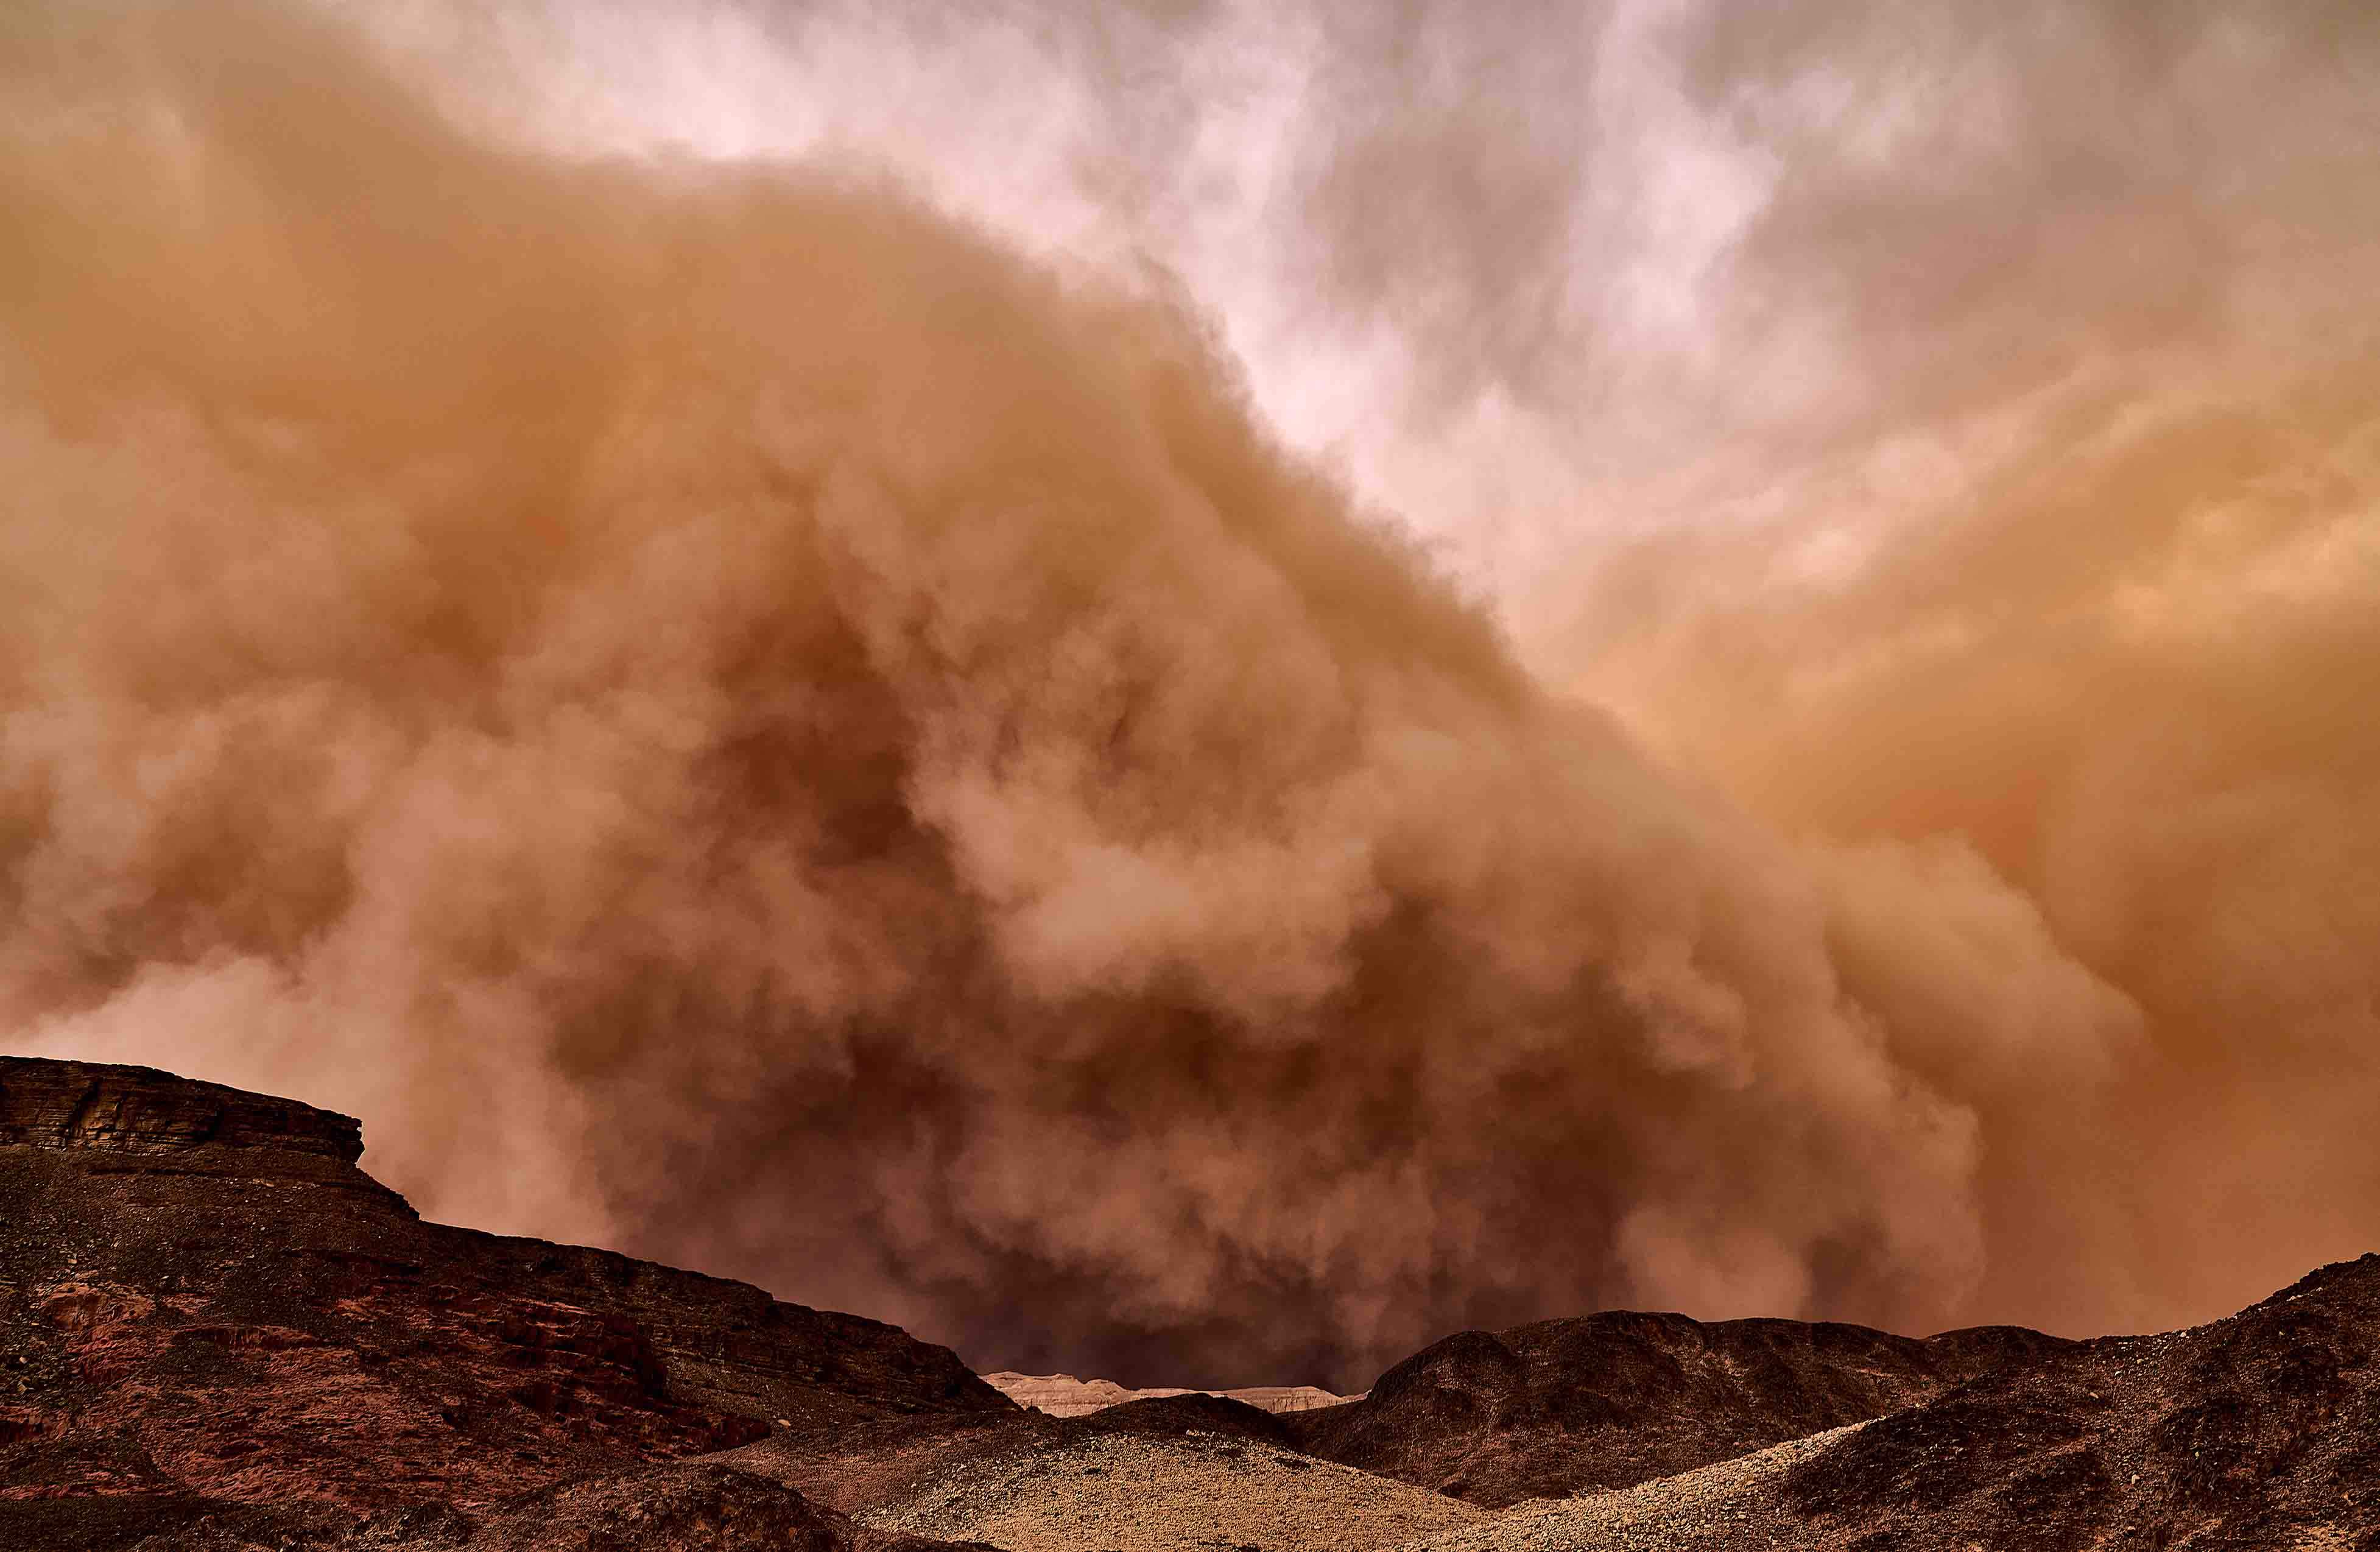 The Dust Storm Microbiome